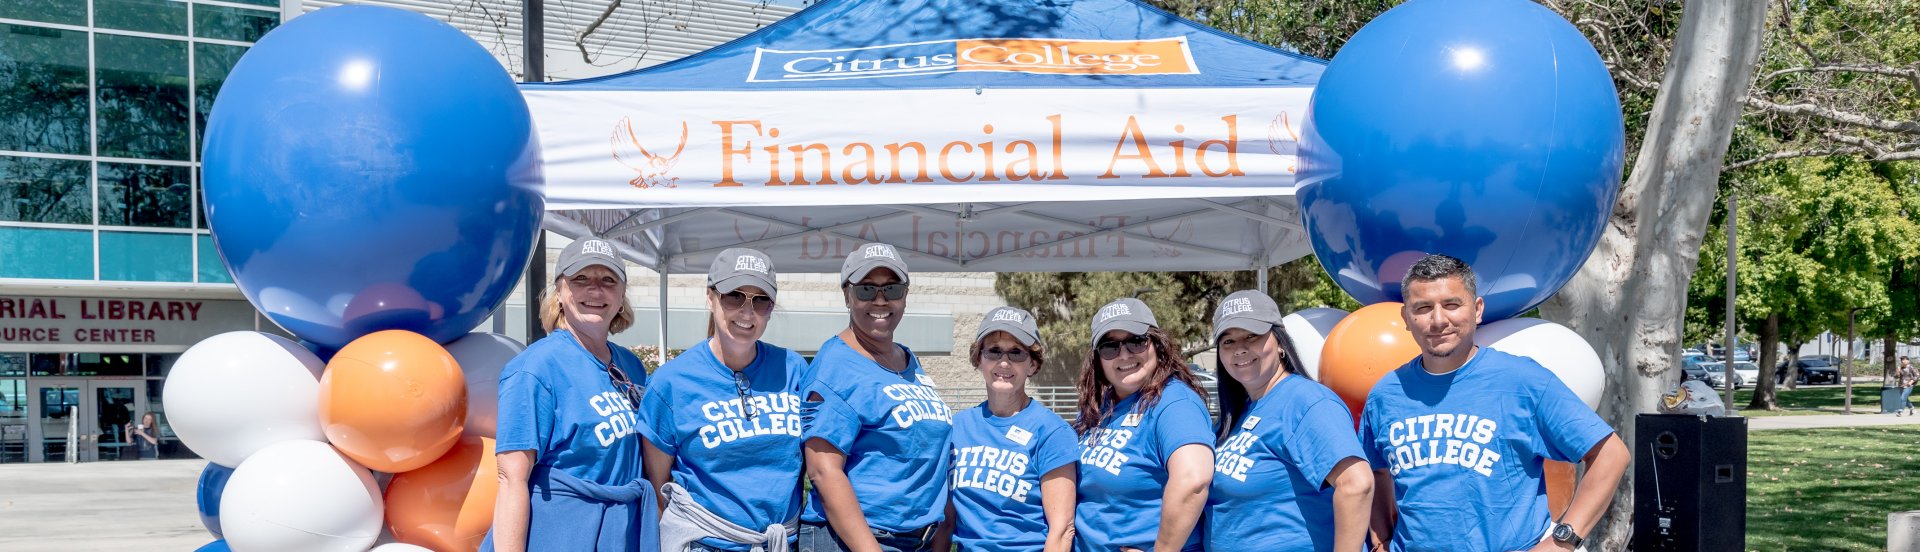 financial aid staff members at a student event at the college's outdoor campus mall